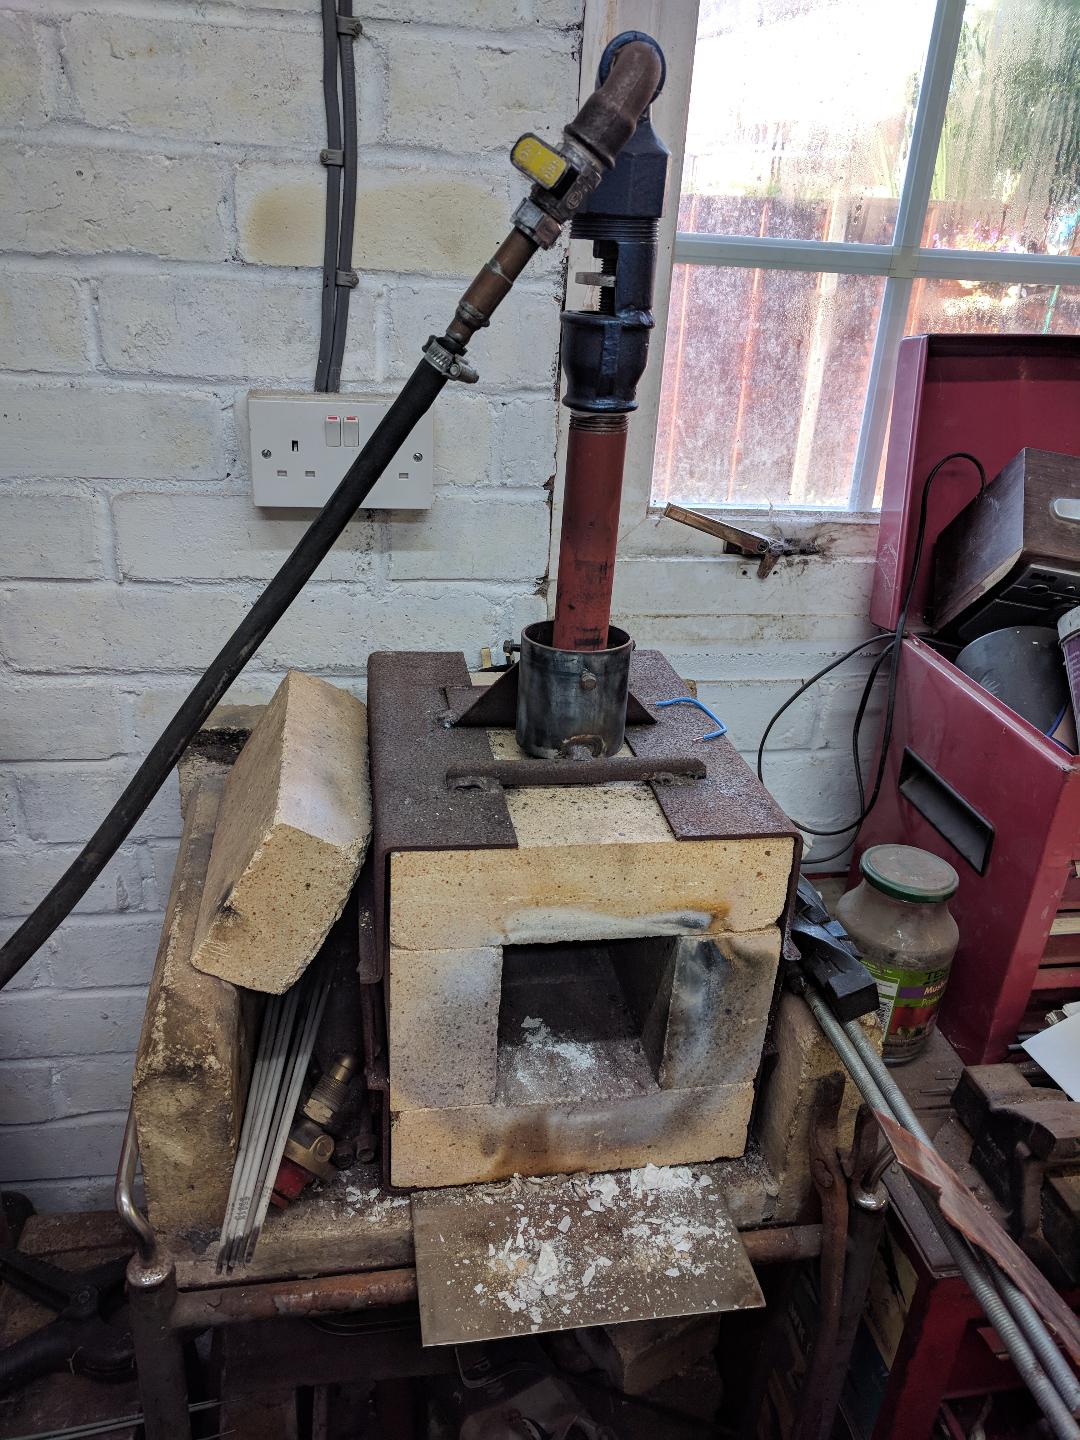 First time making a forge burner for my propane forge! Running